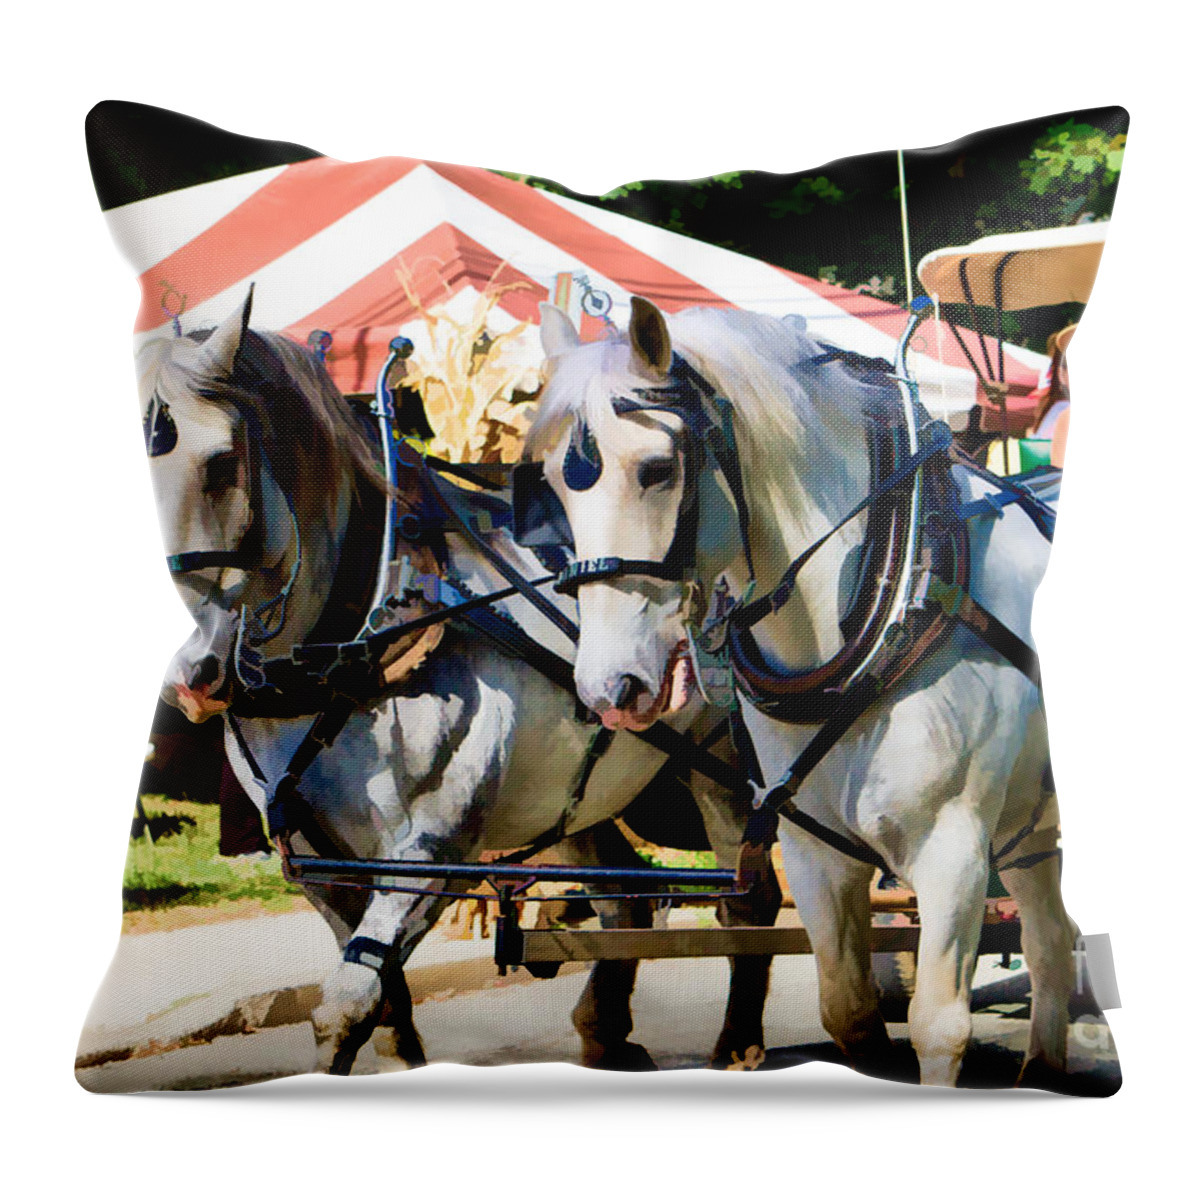  Throw Pillow featuring the photograph Horse Drawn Carriage by Eleanor Abramson